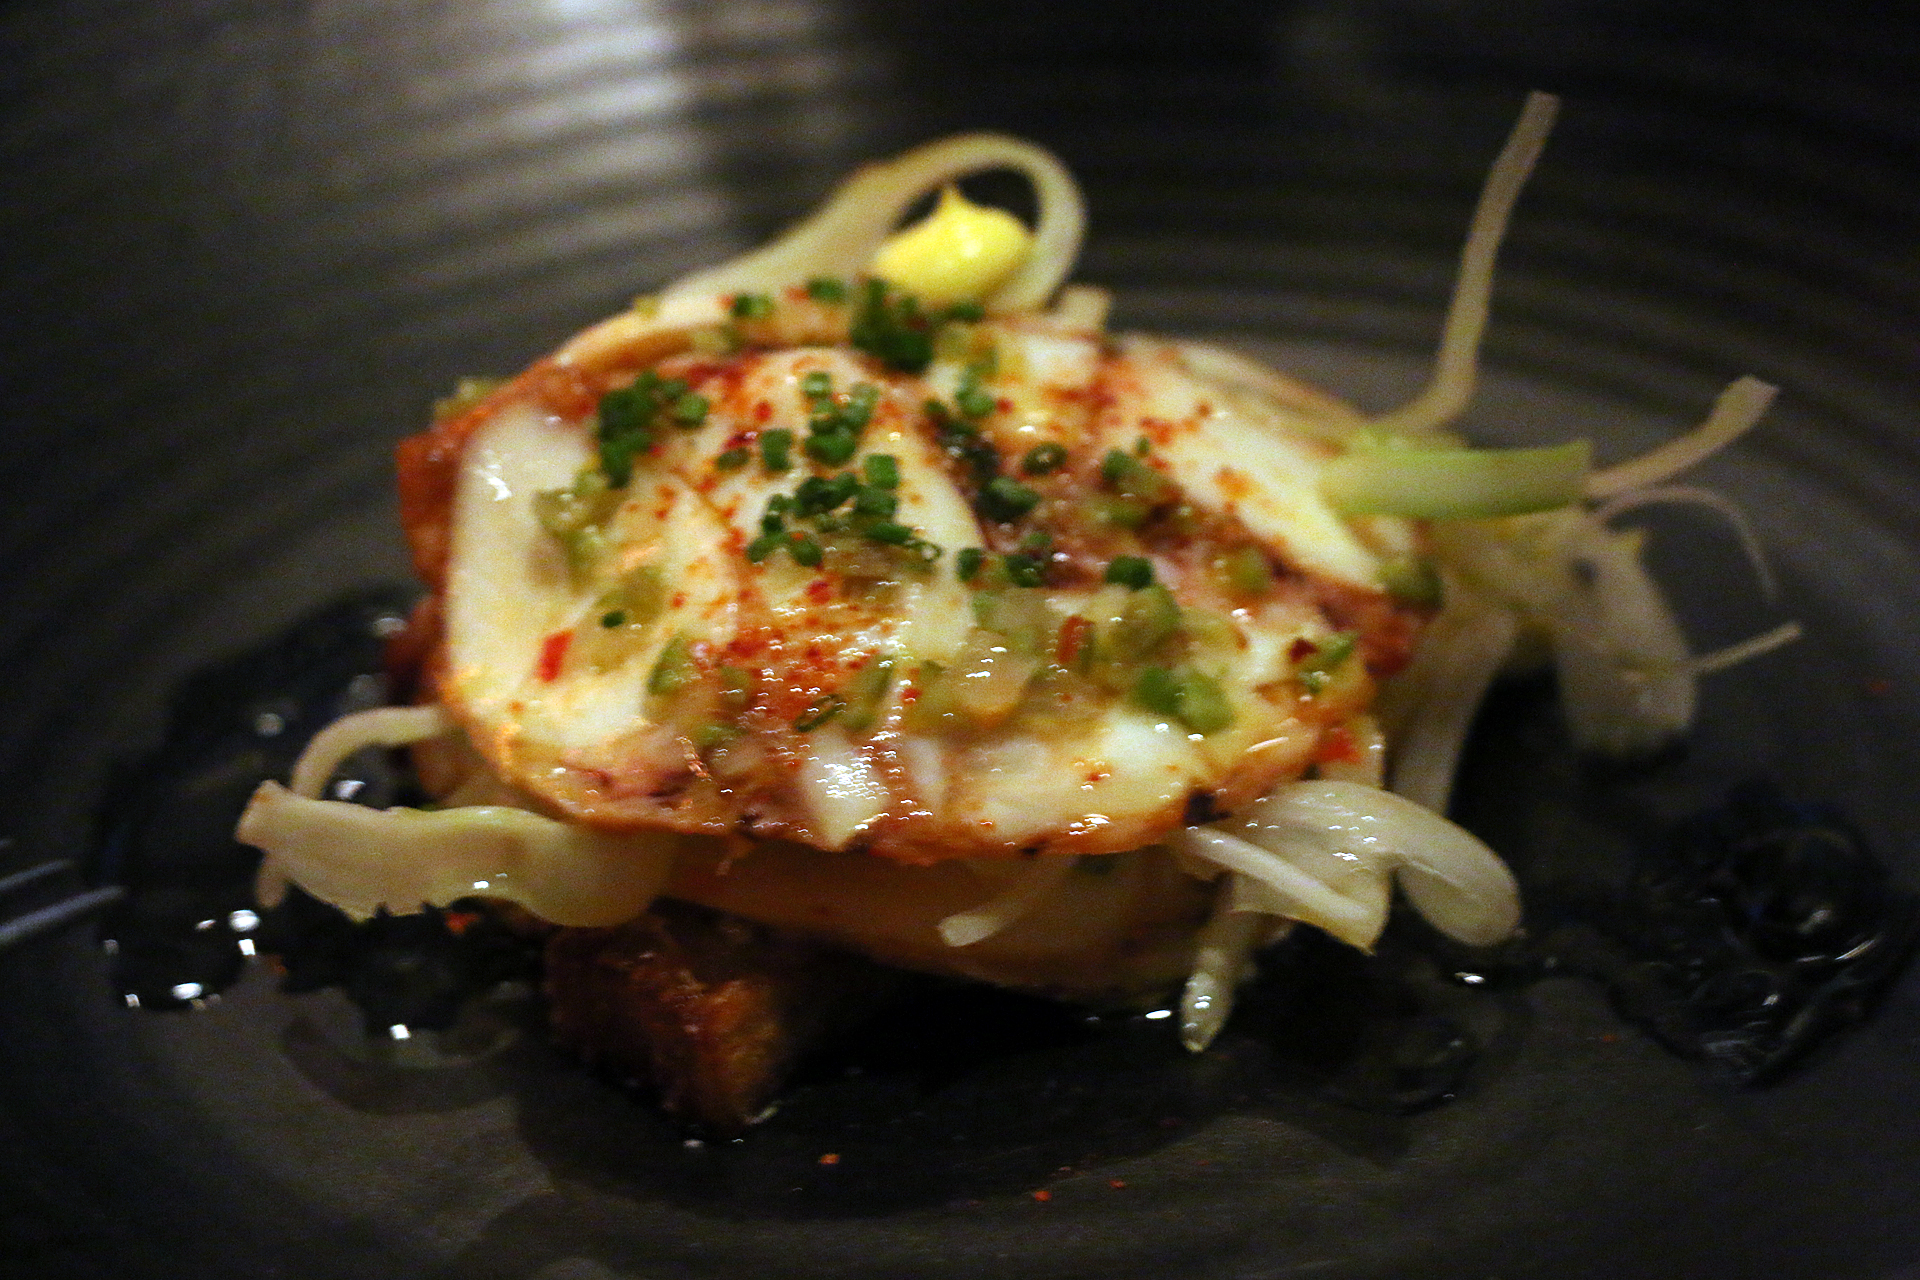 Octopus mille-feuille with pommes Anna, Castelvetrano olives and saffron aioli.